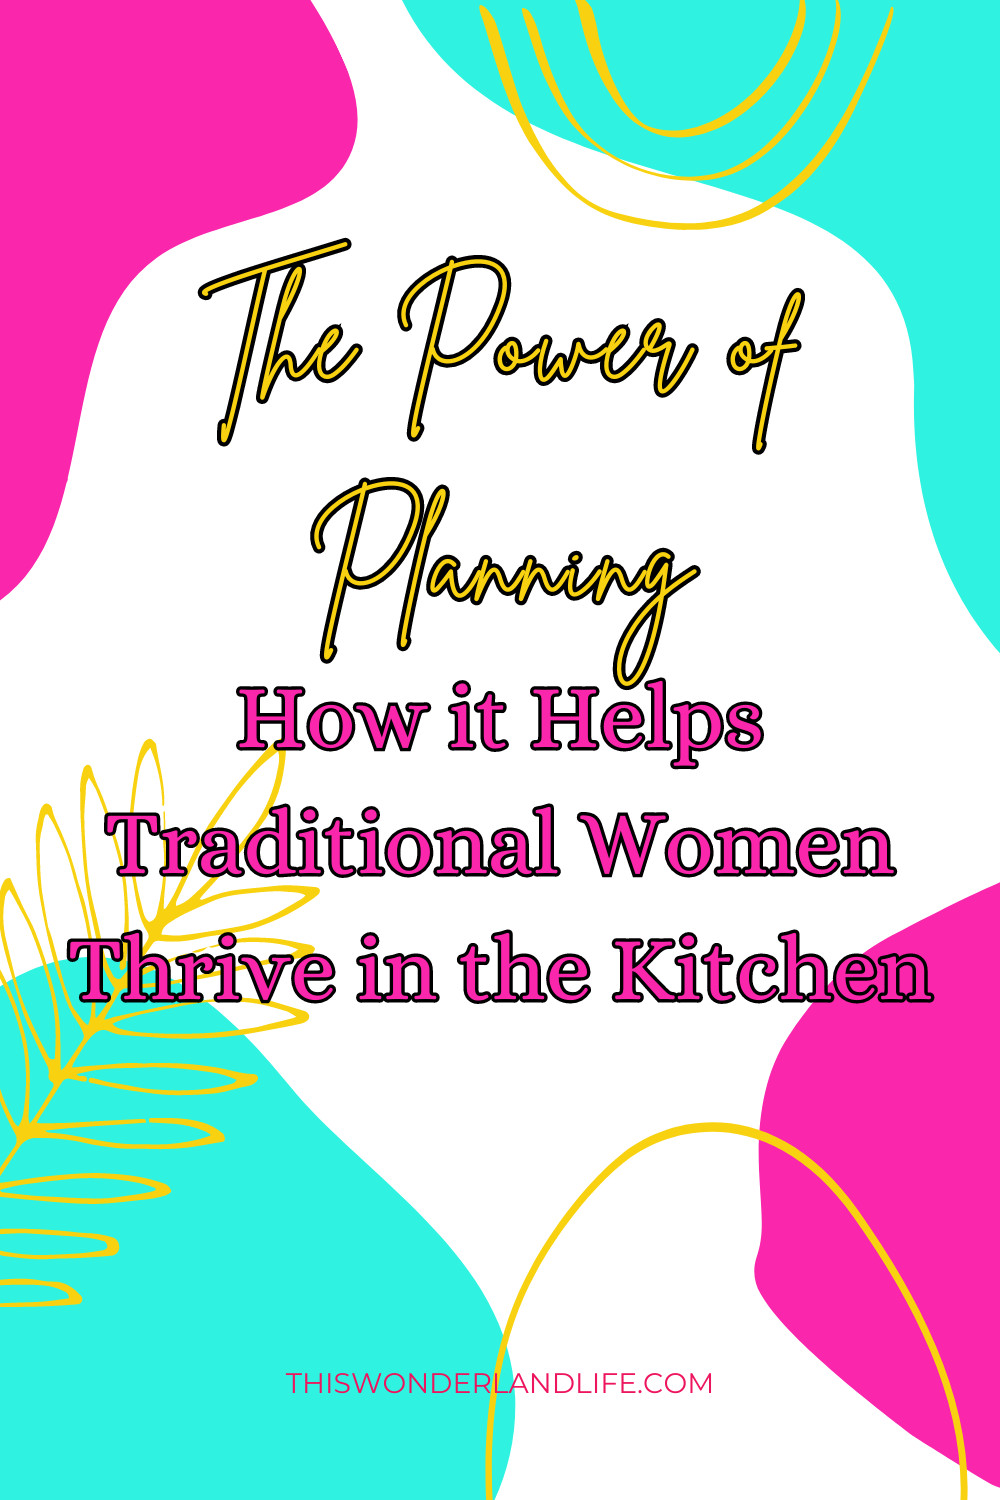 The Power of Planning: How It Helps Traditional Women Thrive in the Kitchen